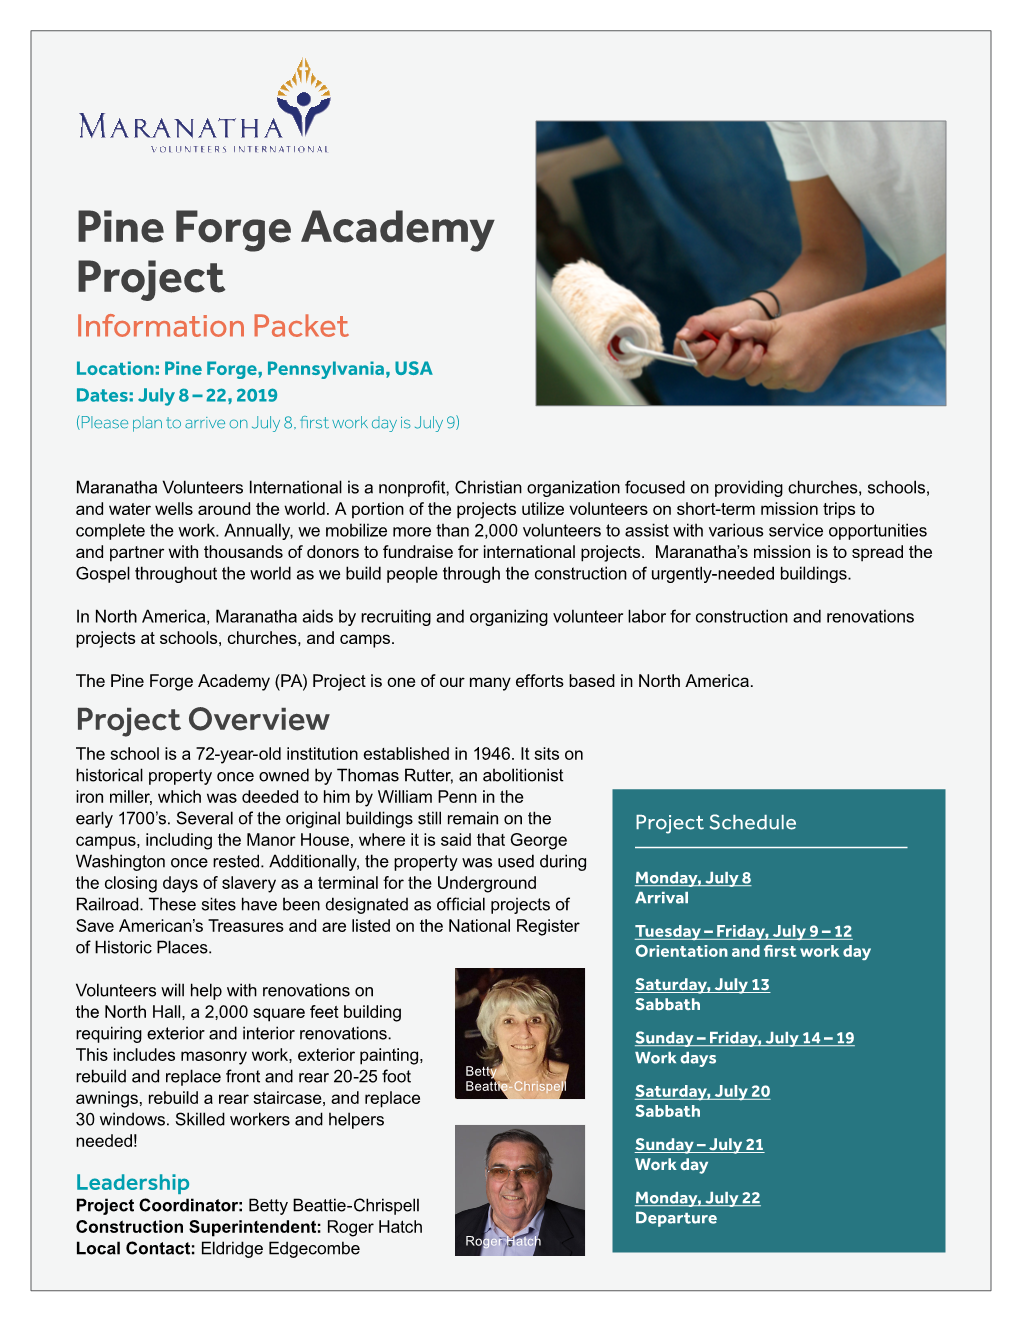 Pine Forge Academy Project